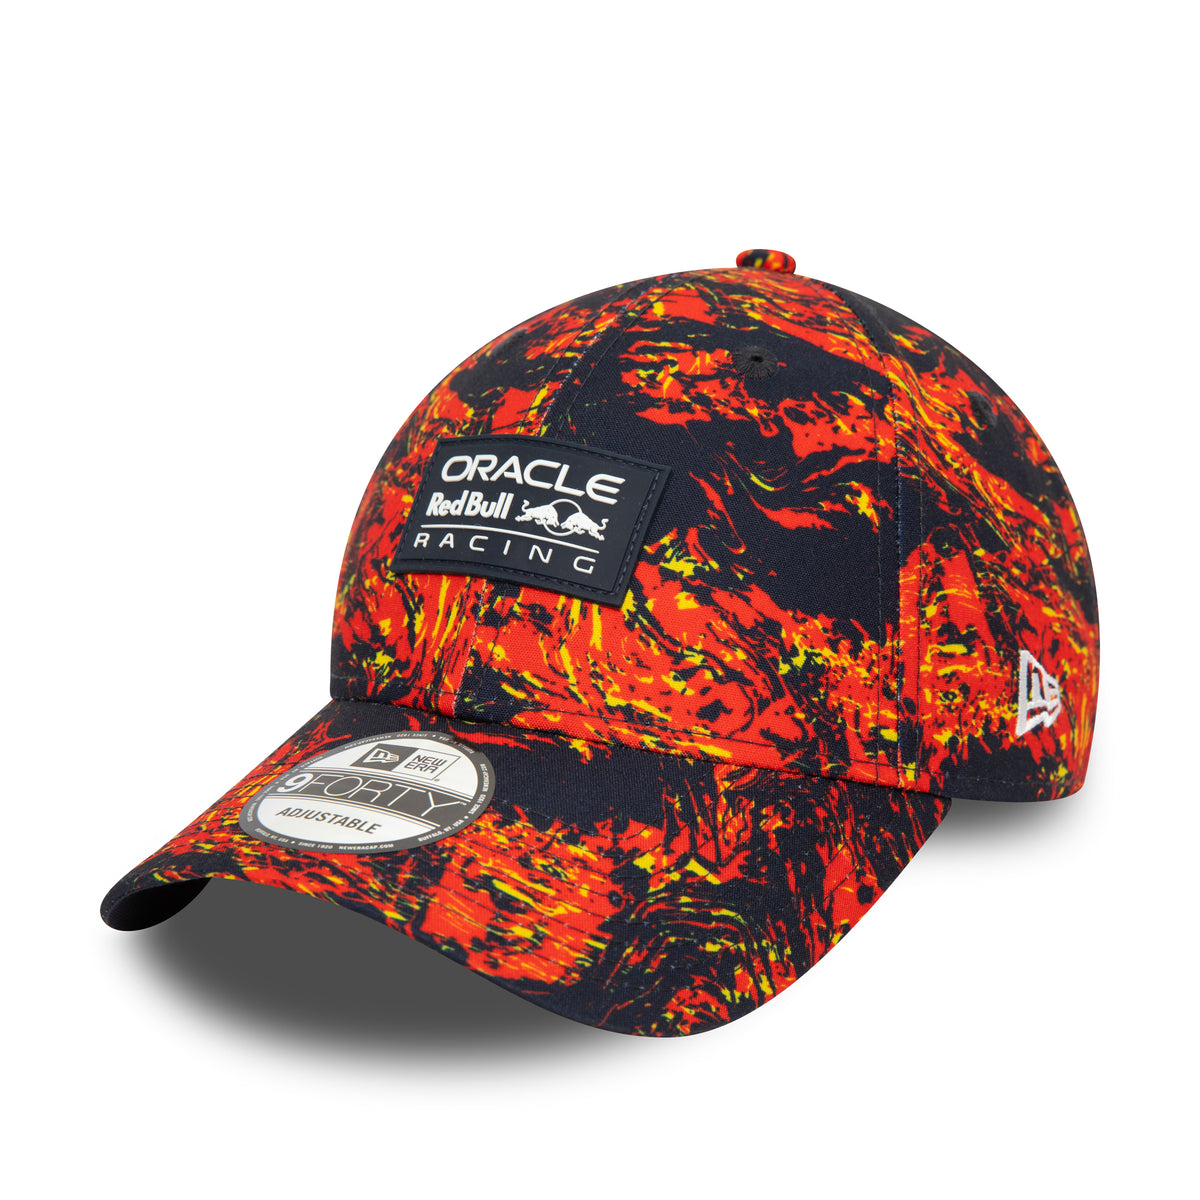 Cappellino 9FORTY Red Bull Racing All Over Print Blu Navy - 5608